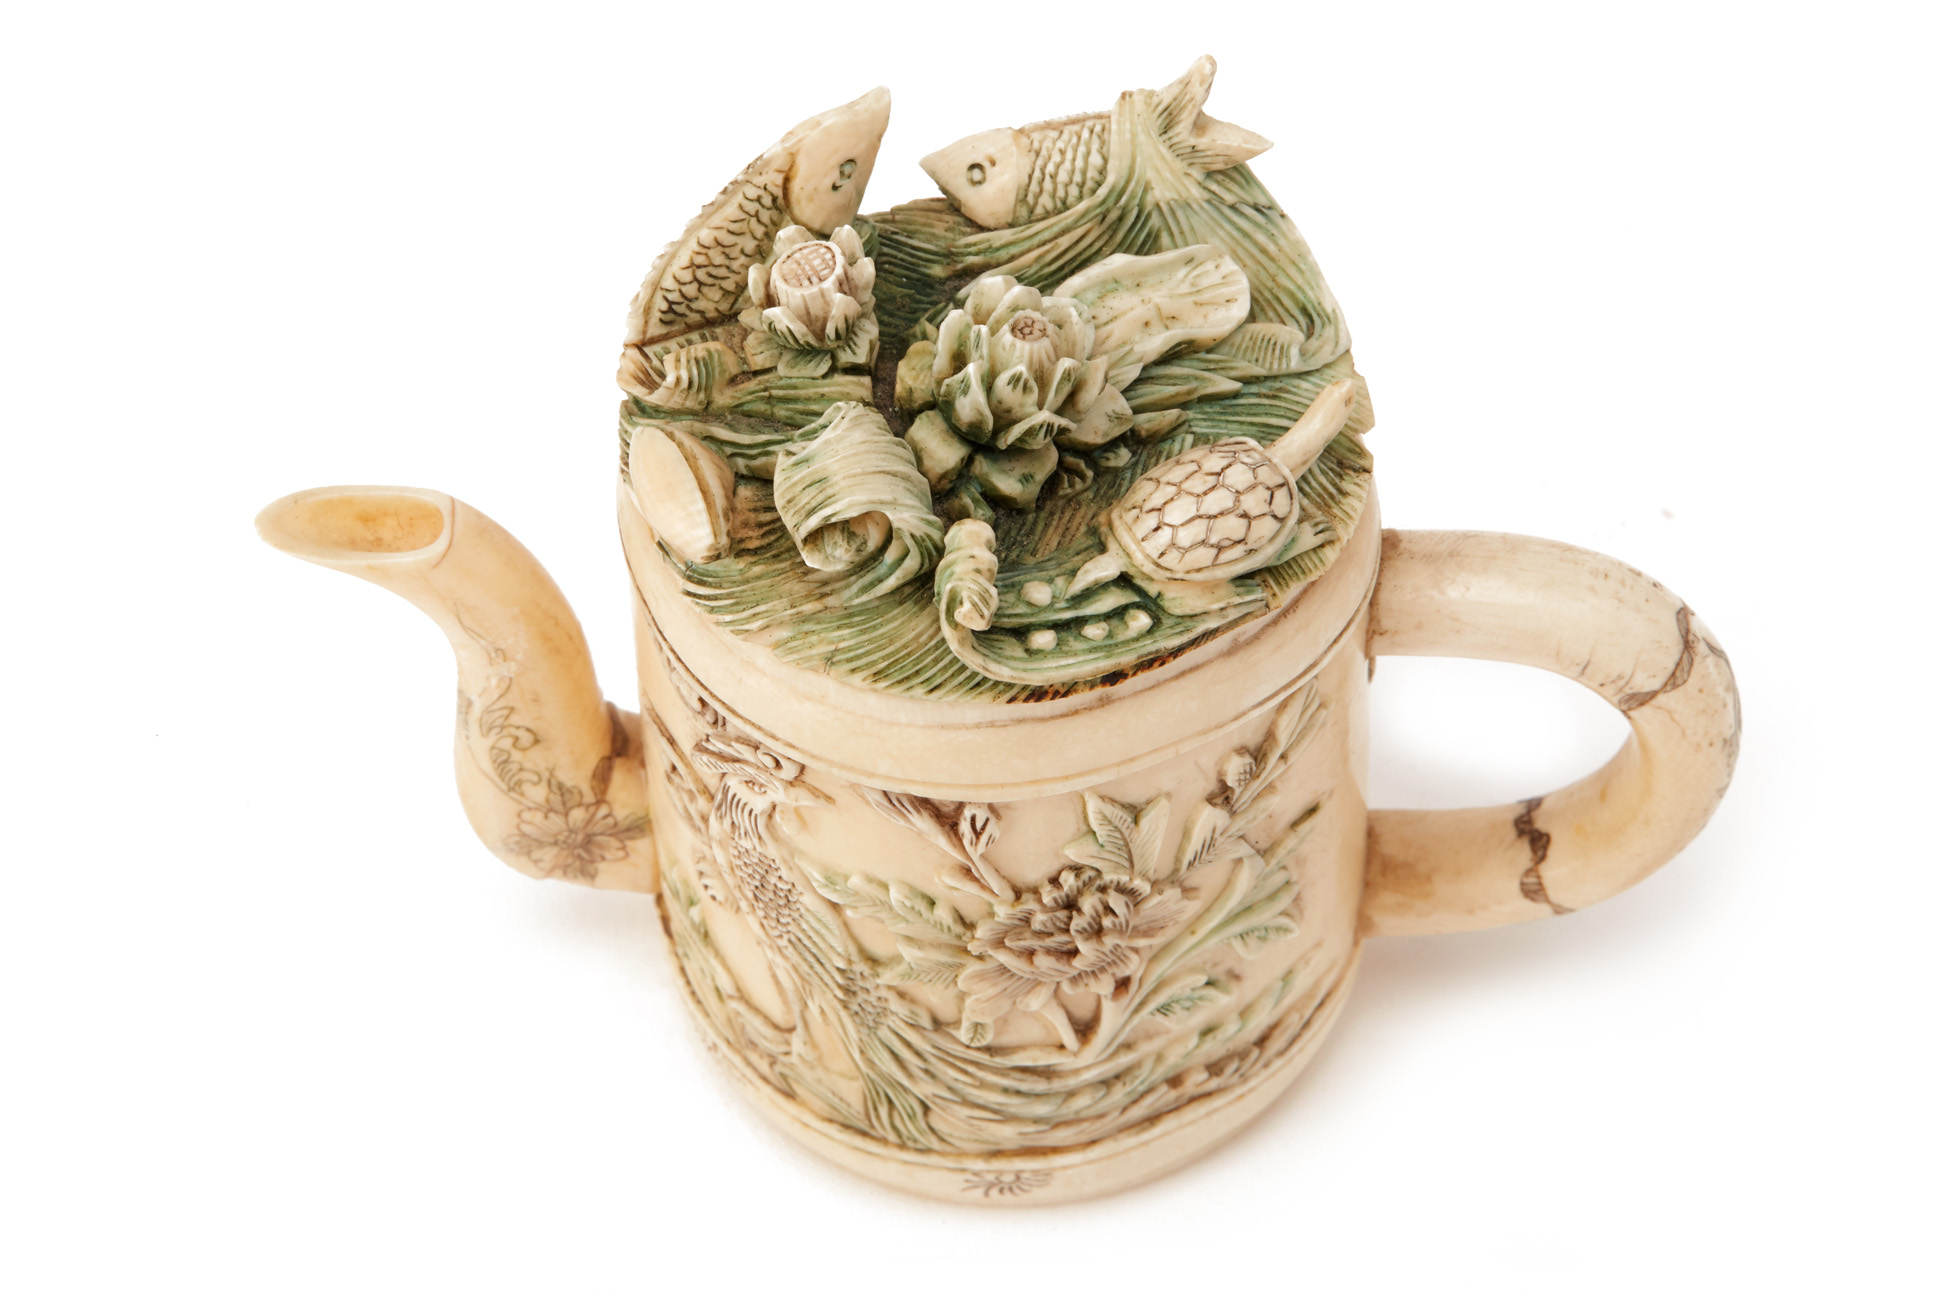 A MINIATURE CARVED IVORY TEAPOT - Image 3 of 4